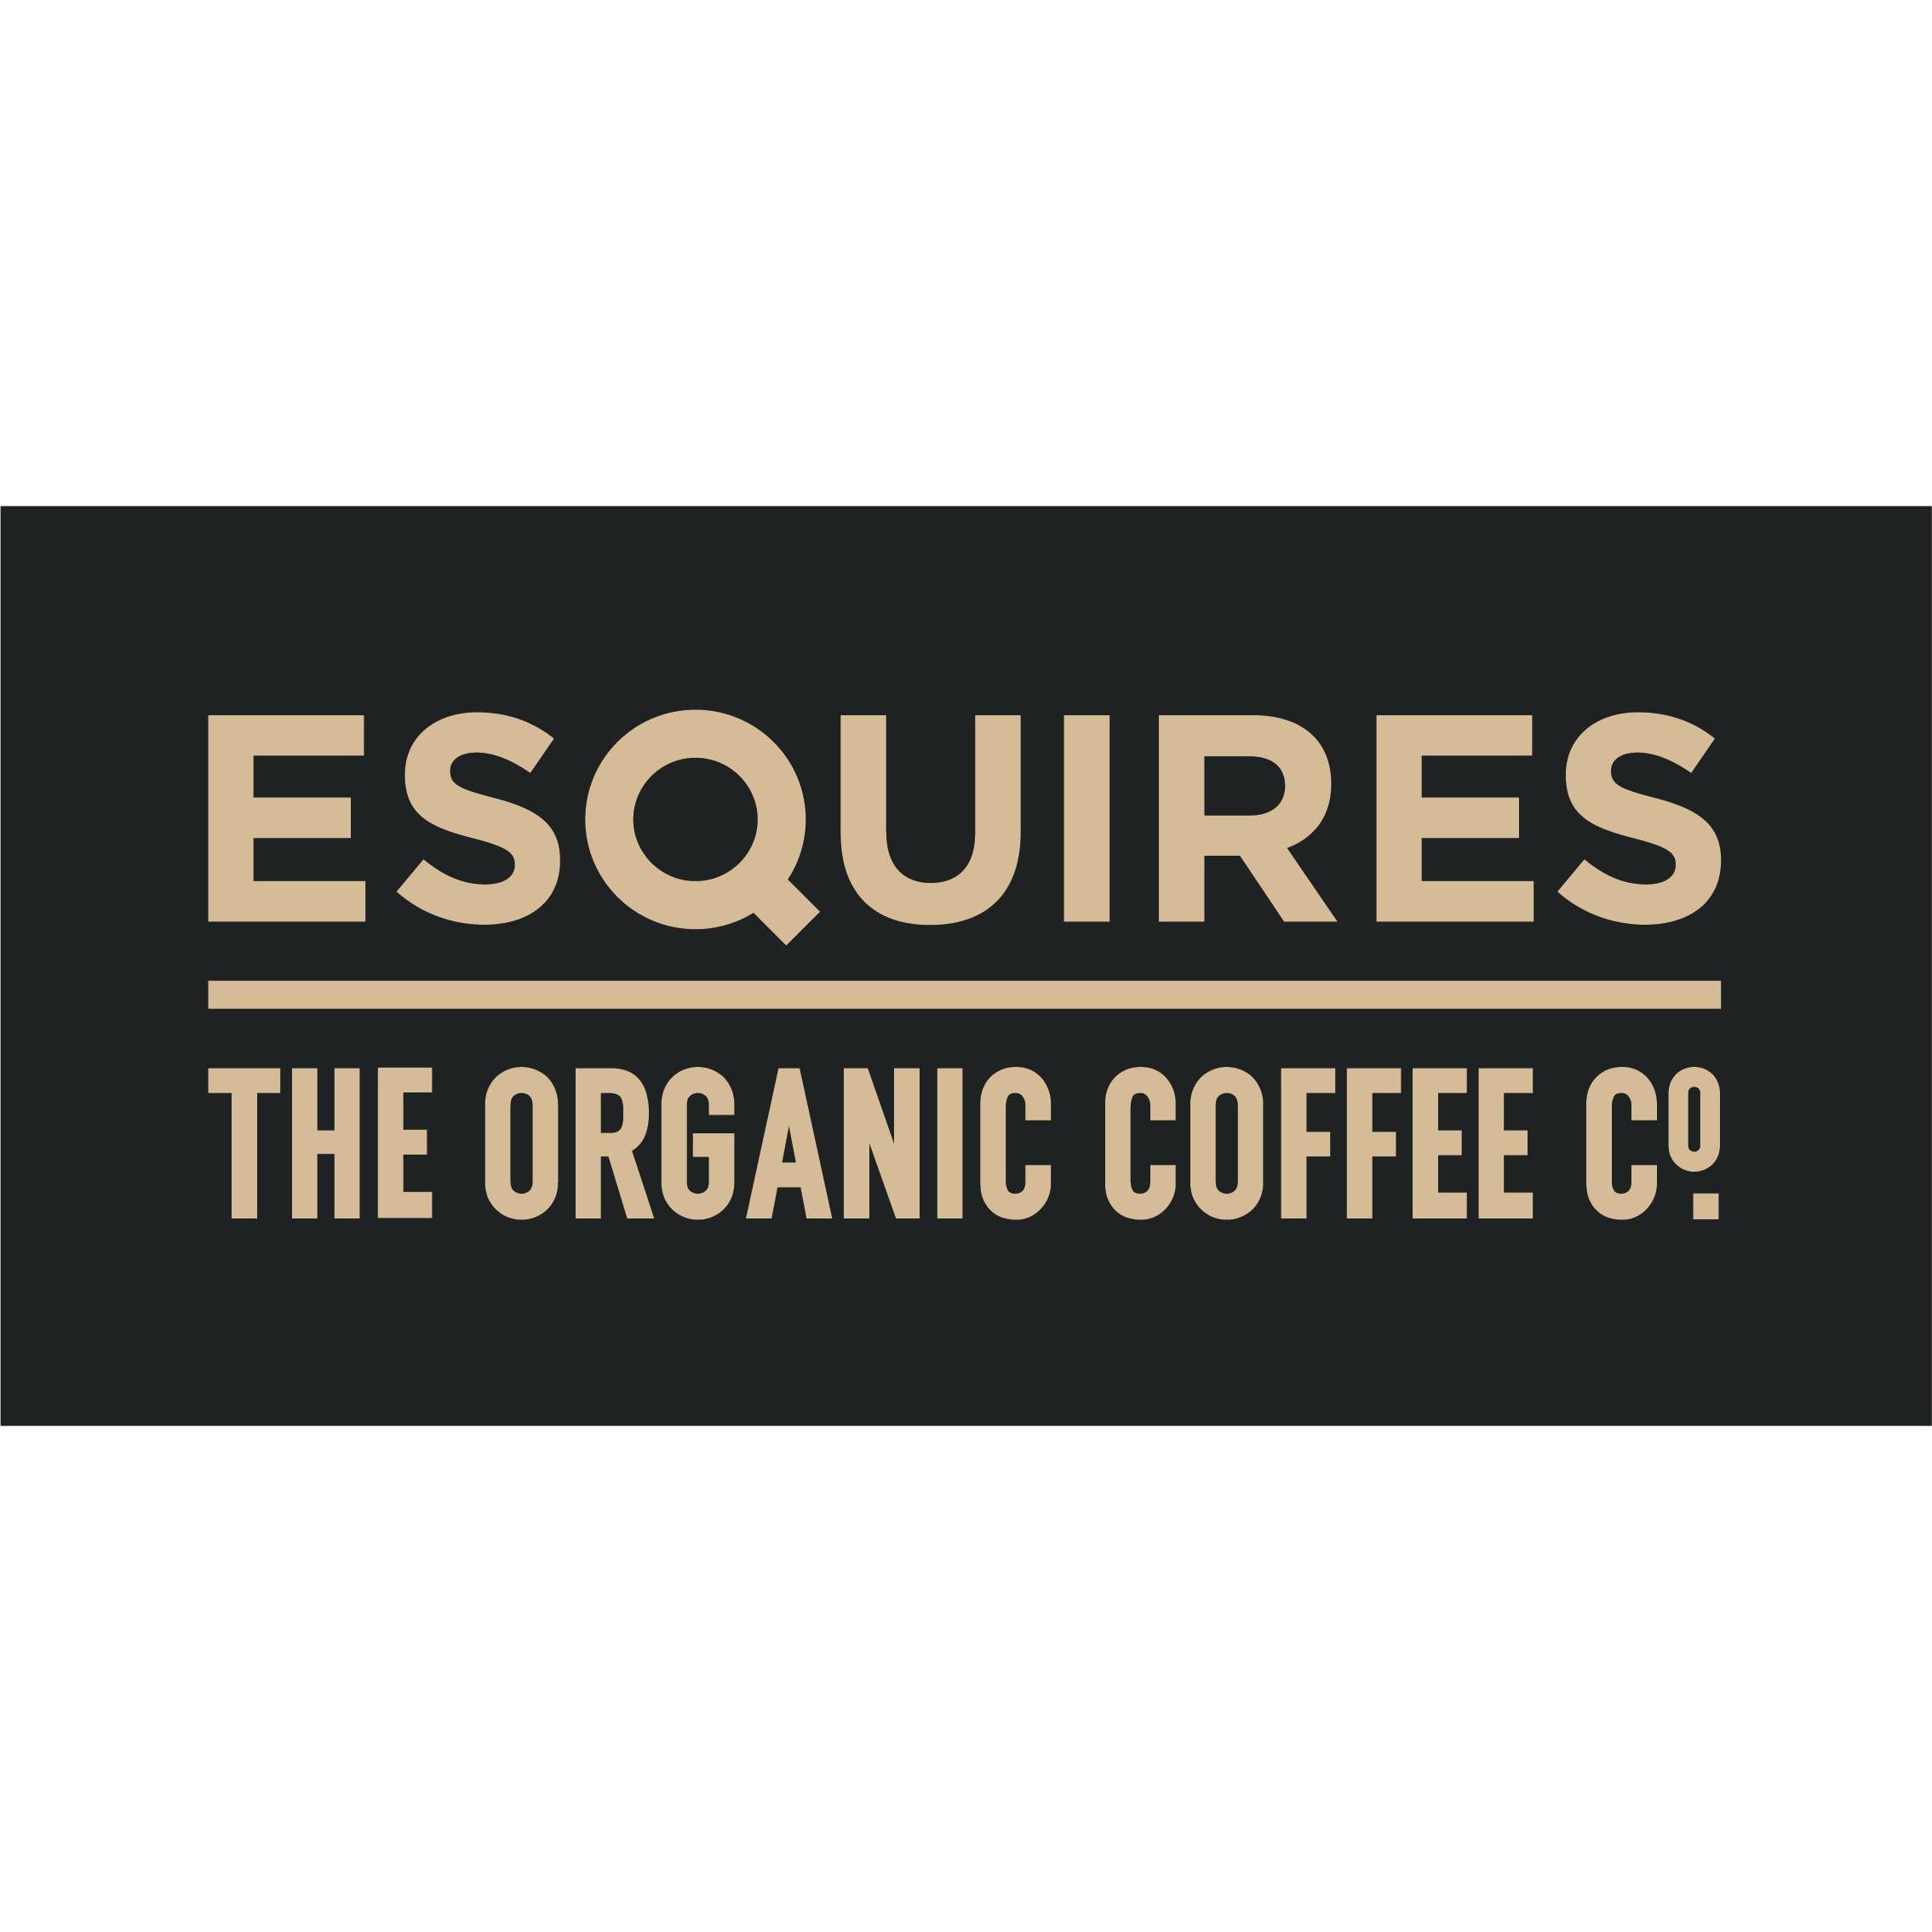 Esquires Coffee Hitchin - Hitchin, Hertfordshire SG5 1DR - 07961 136131 | ShowMeLocal.com